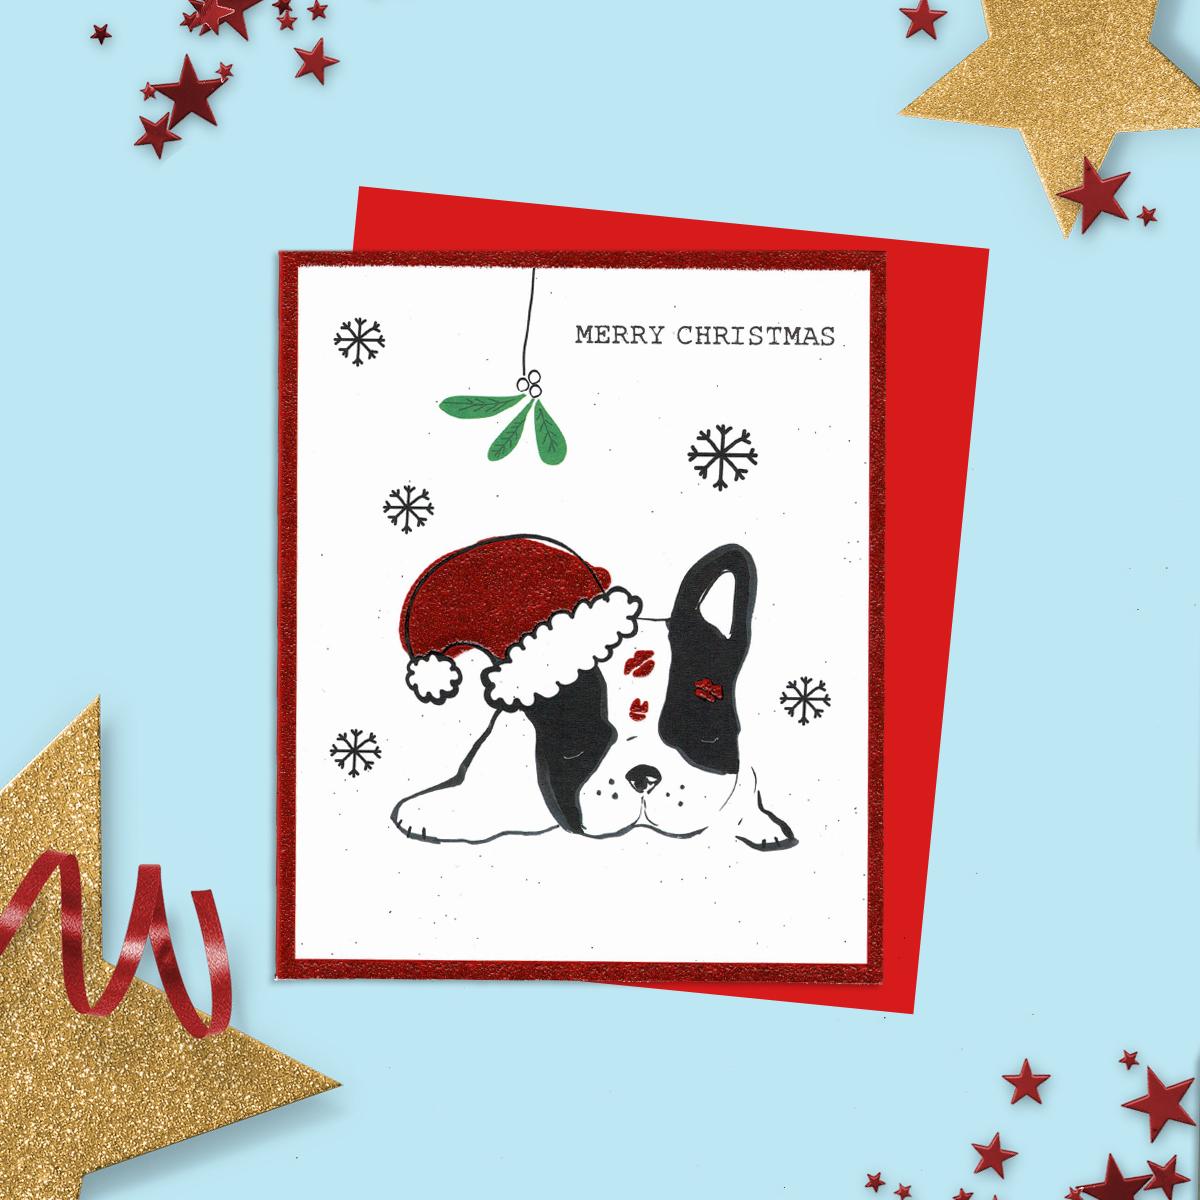 General Christmas Card Featuring A French Bulldog Under the Mistletoe! Red Glitter And Envelope To Complete